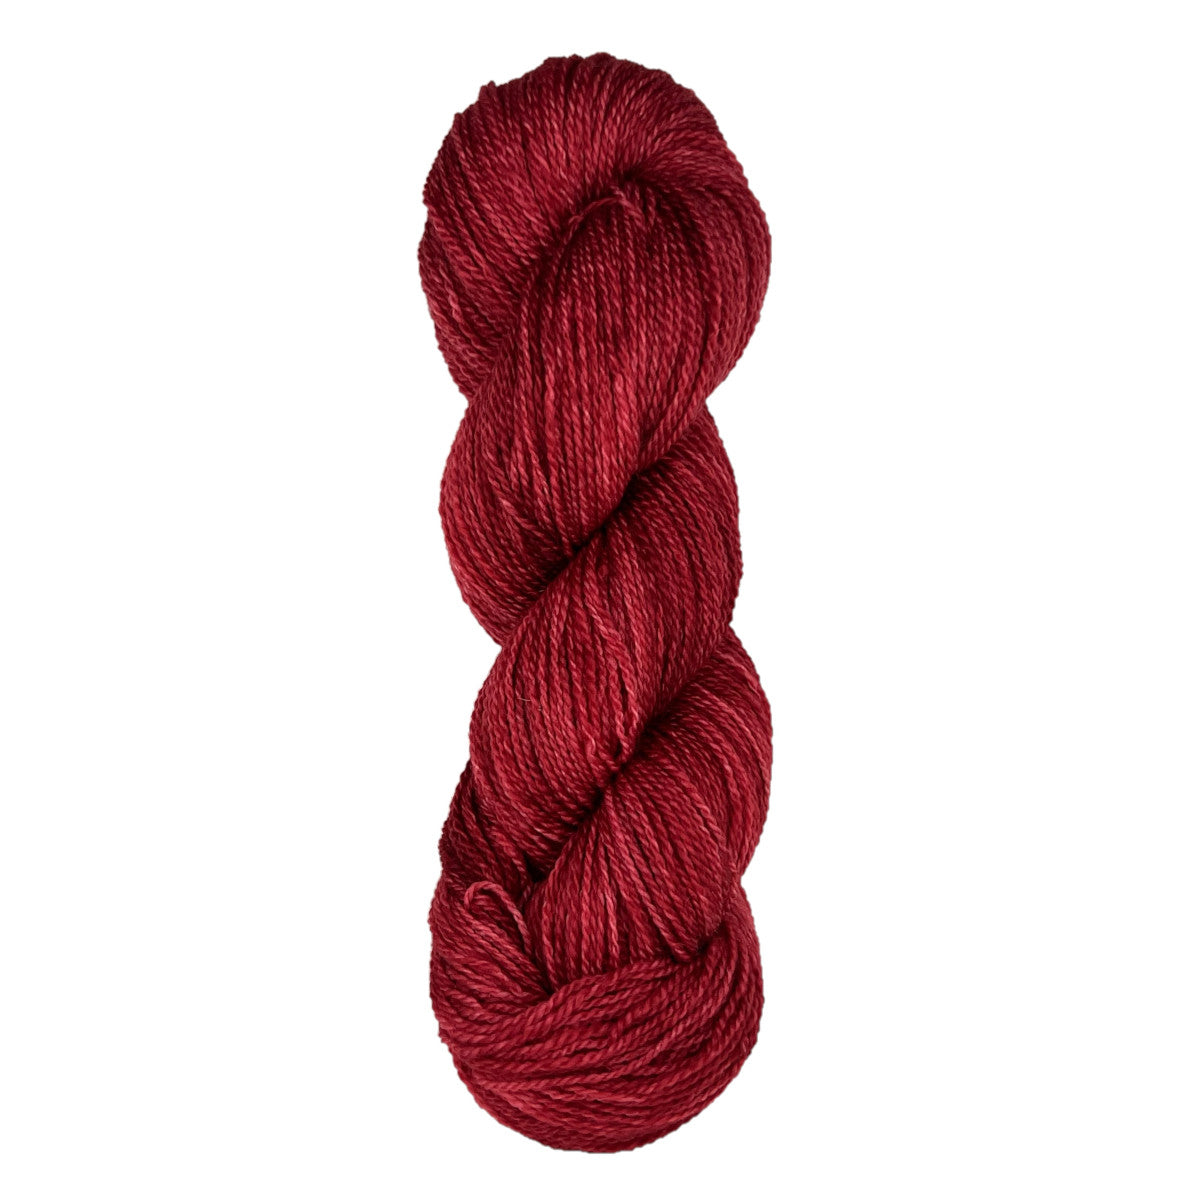 Leviathan Fibres Bluefaced Leicester Fingering Weight